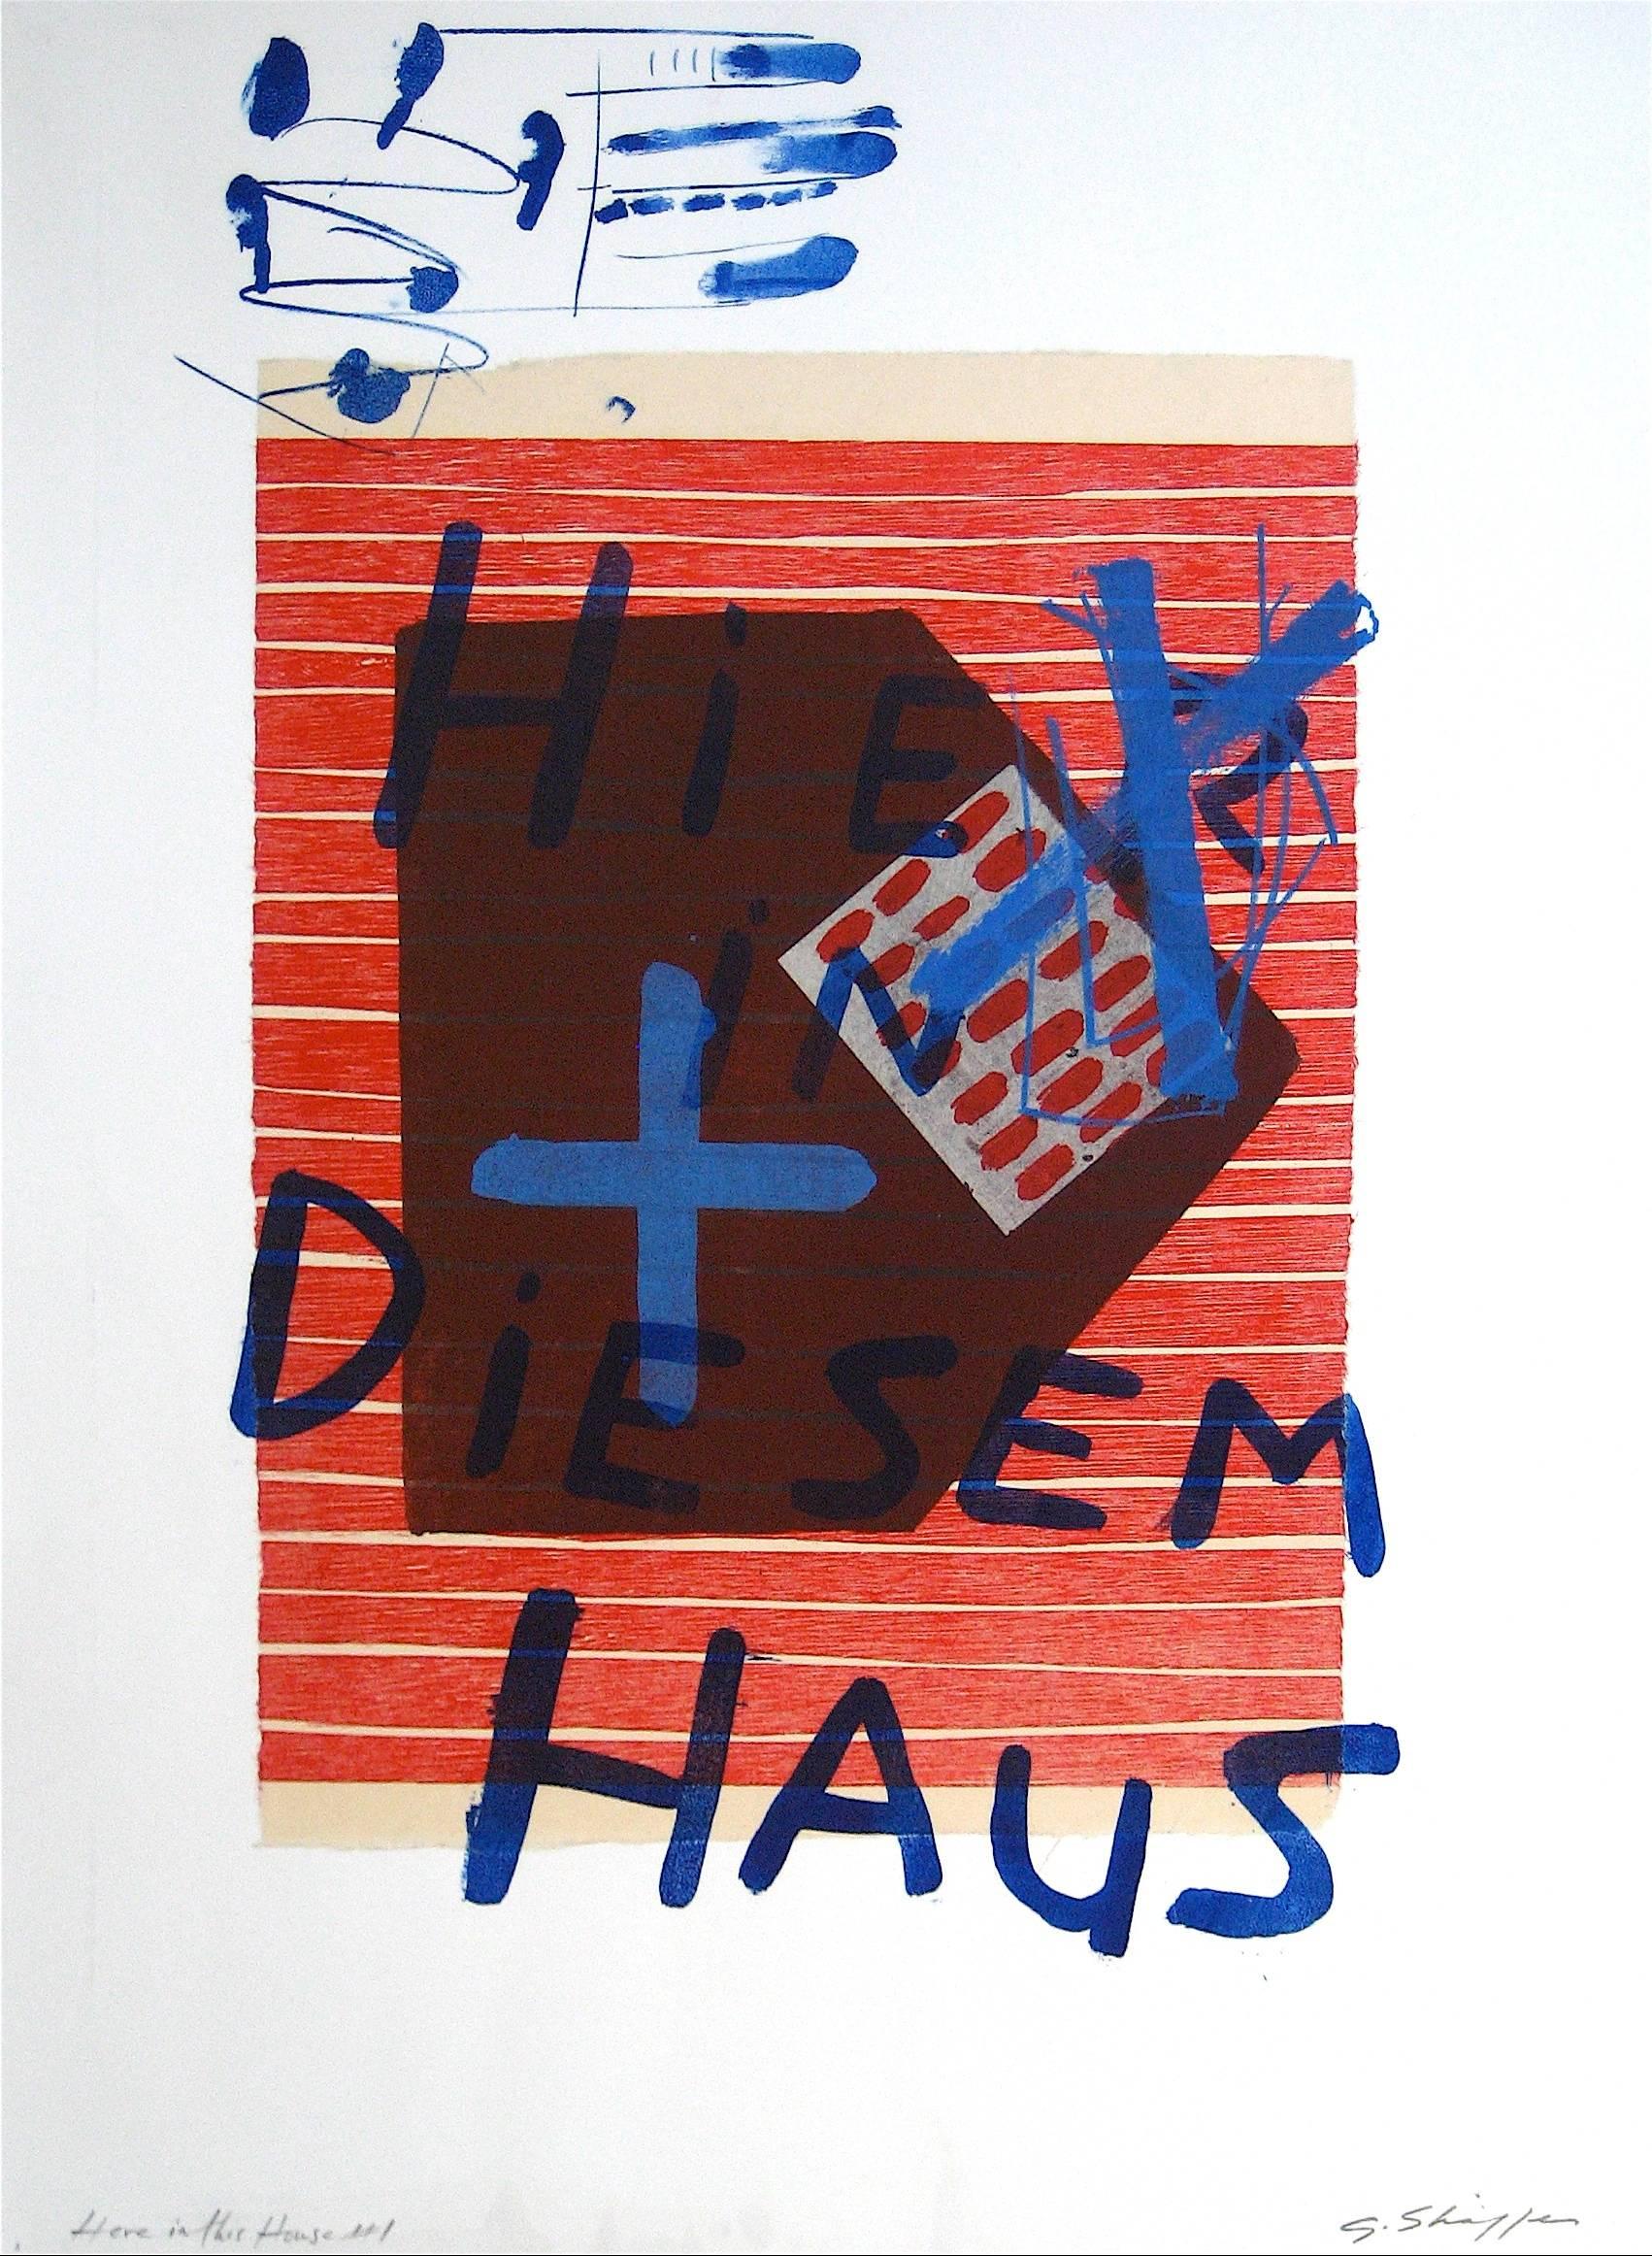 Gary Lee Shaffer Abstract Print - "Here in This House #1" Abstract Lithograph in Red and Blue, 1998